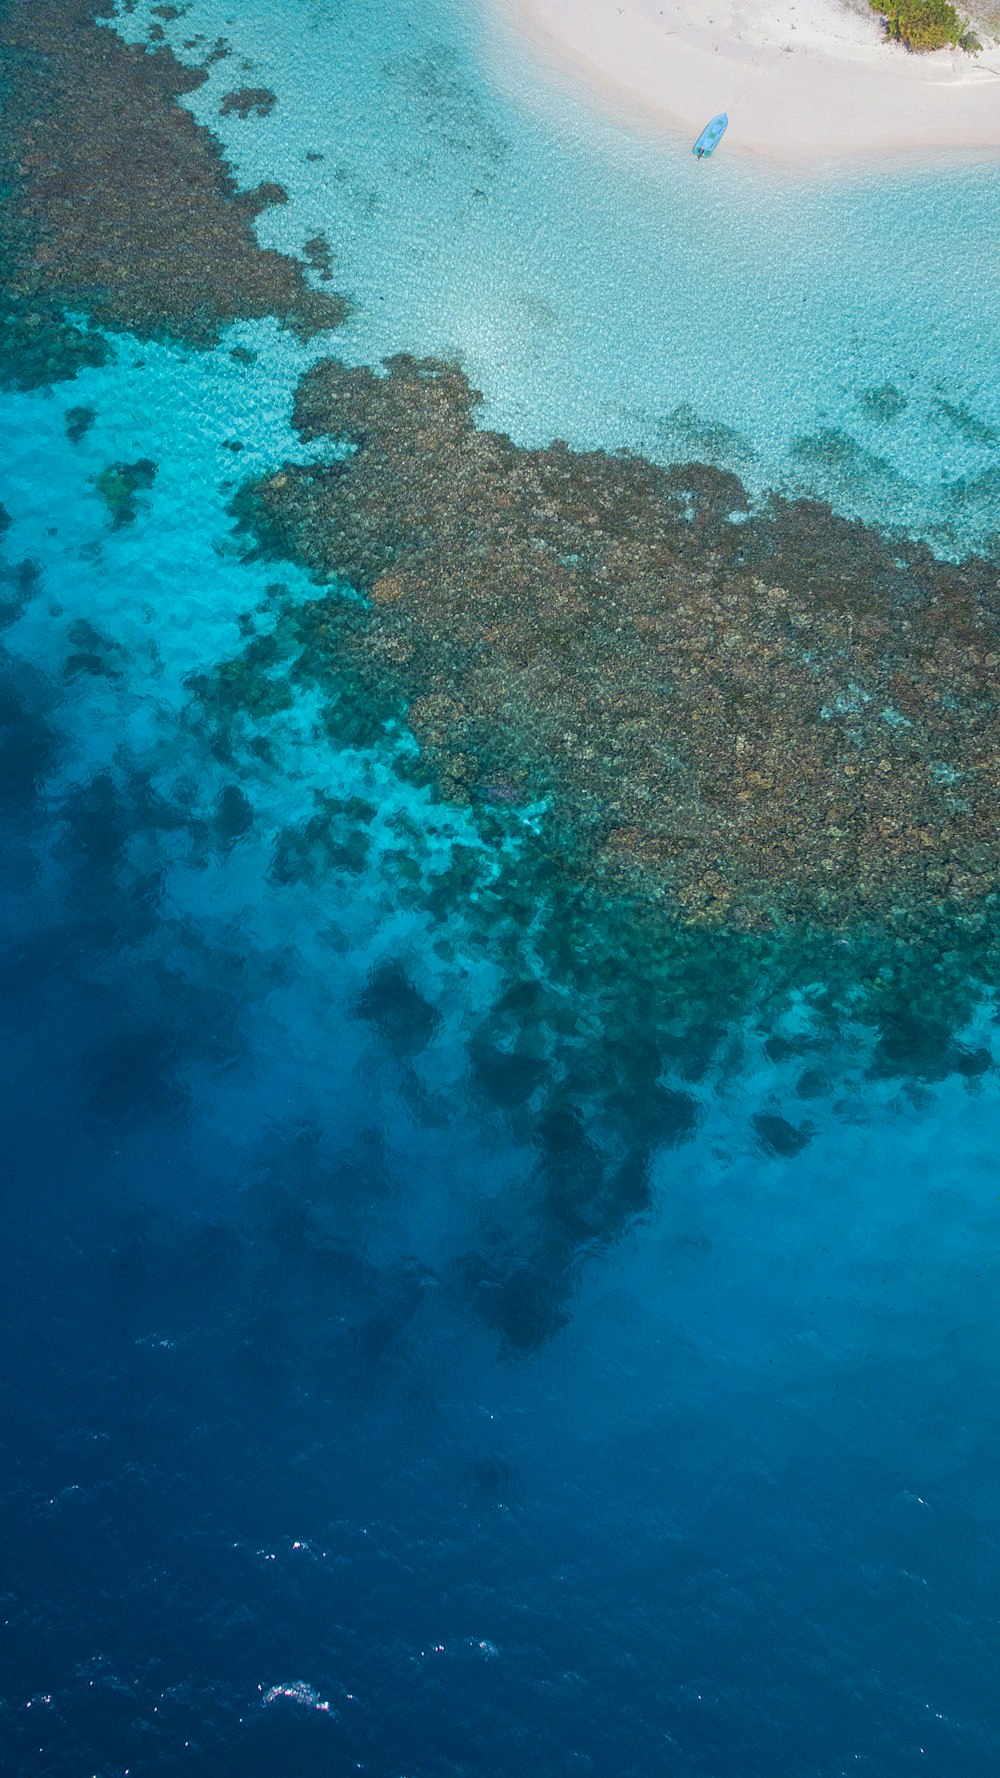 an aerial view of a coral reef off the coast of a tropical island